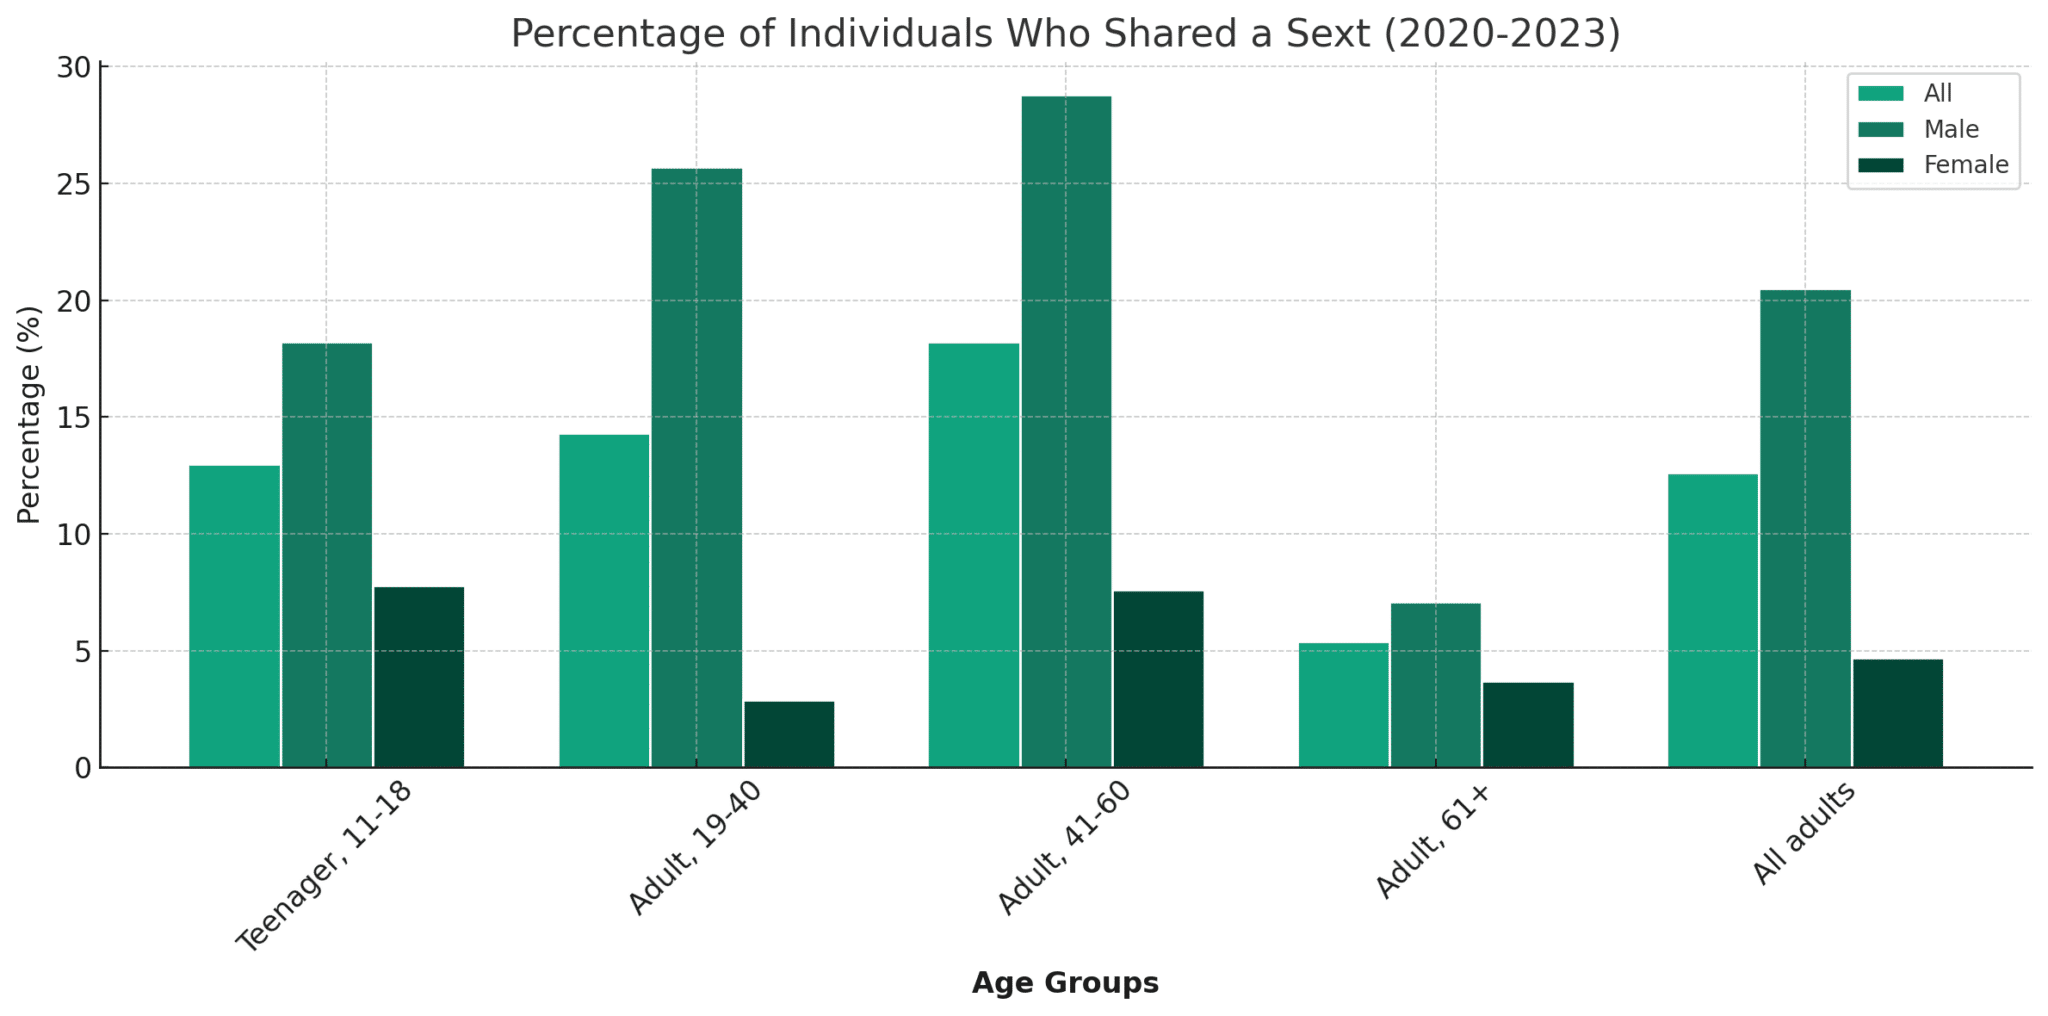 percentage of individuals who shared a sext across different age groups from 2020 to 2023